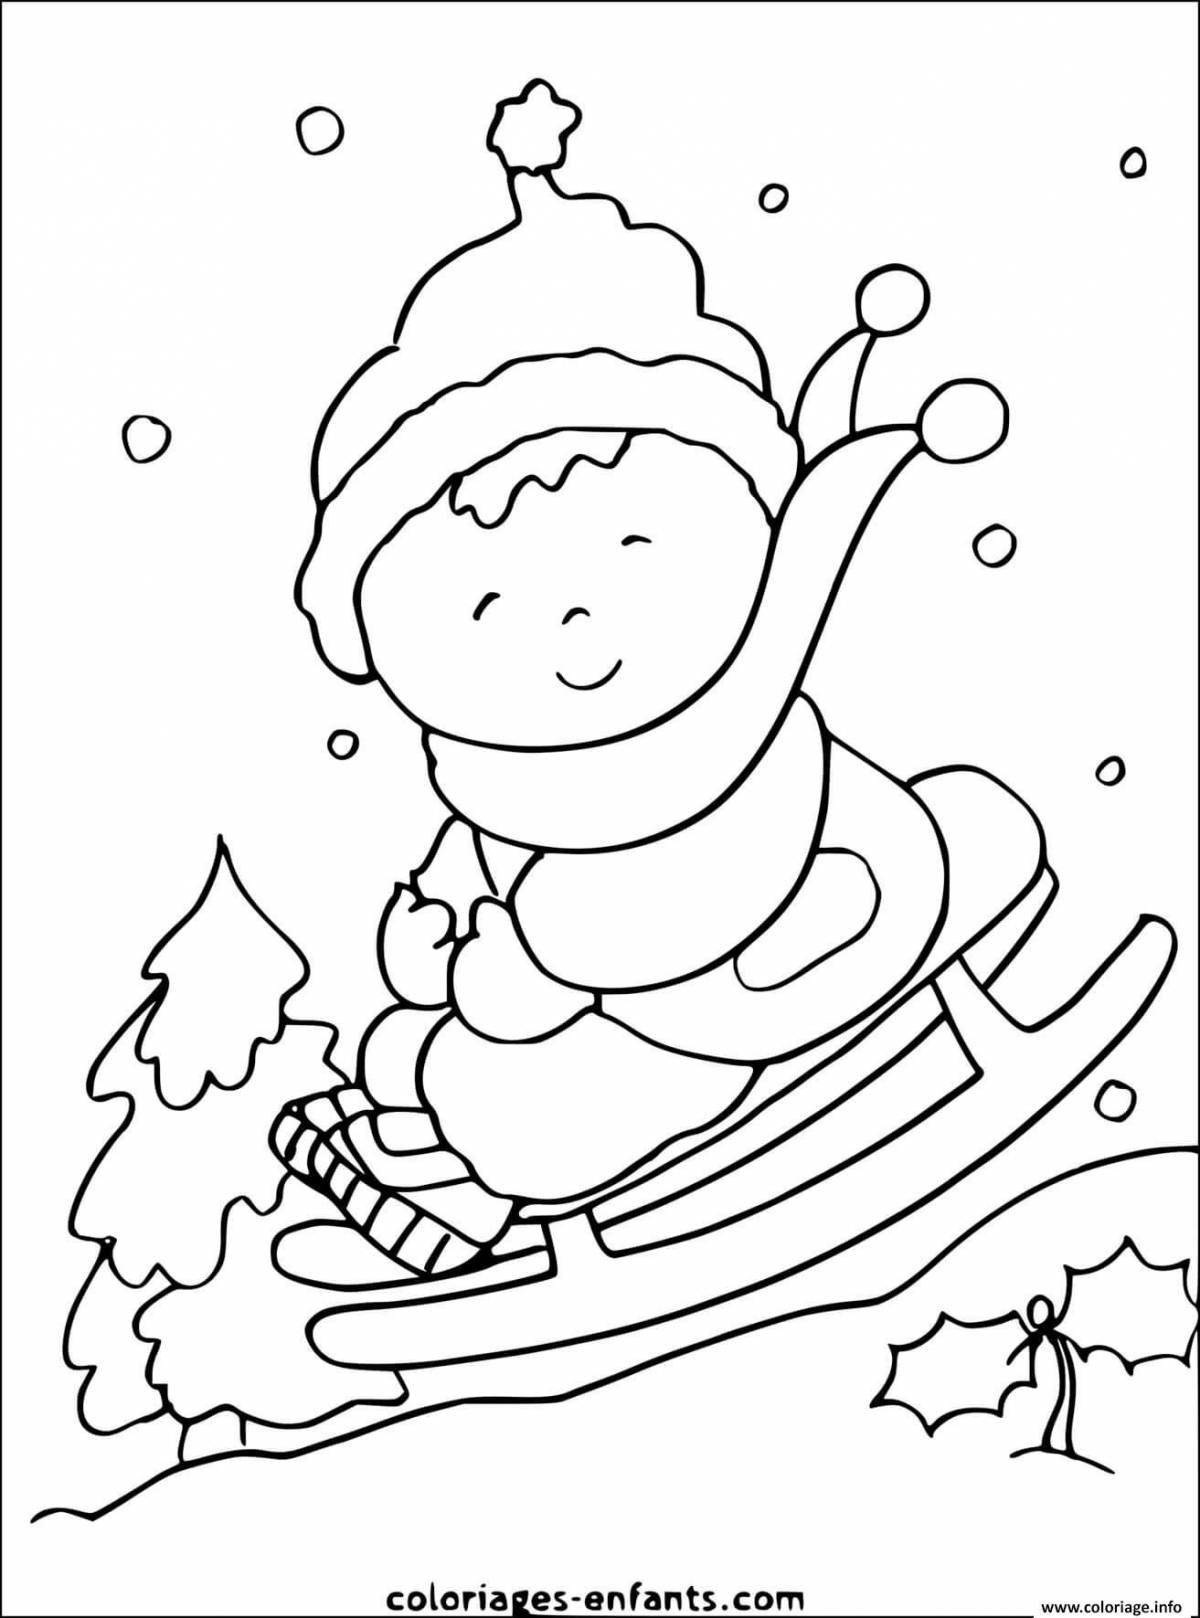 Exquisite winter coloring book for 2-3 year olds